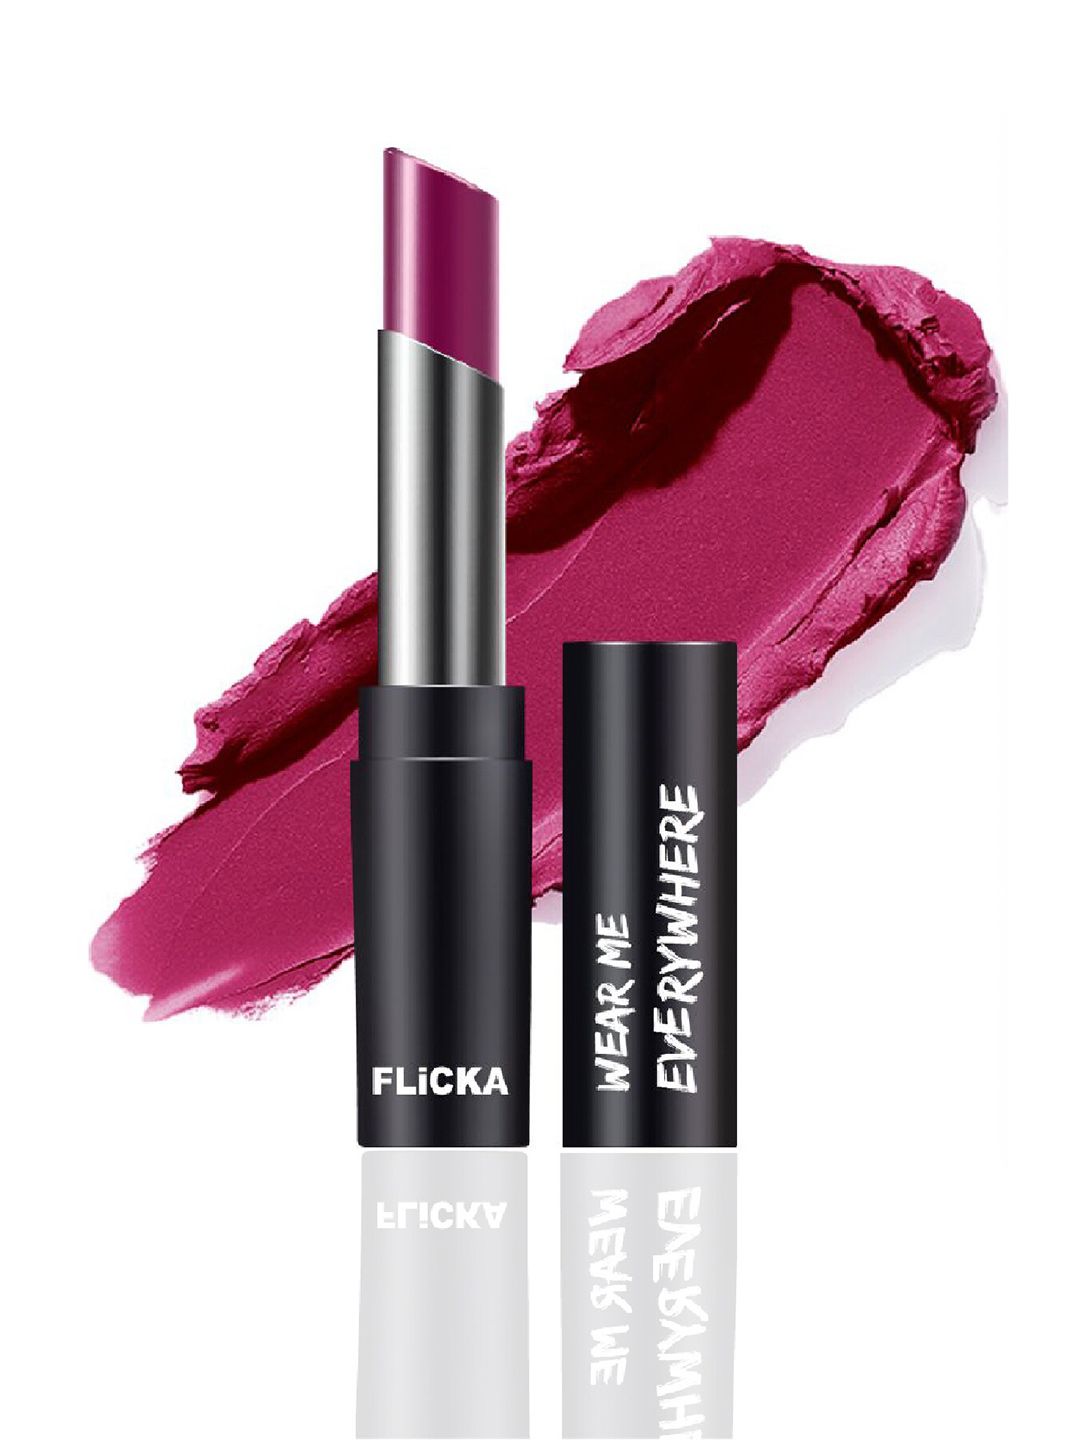 FLiCKA Wear Me Everywhere Creamy Matte Lipstick - The Brides Pink 20 Price in India